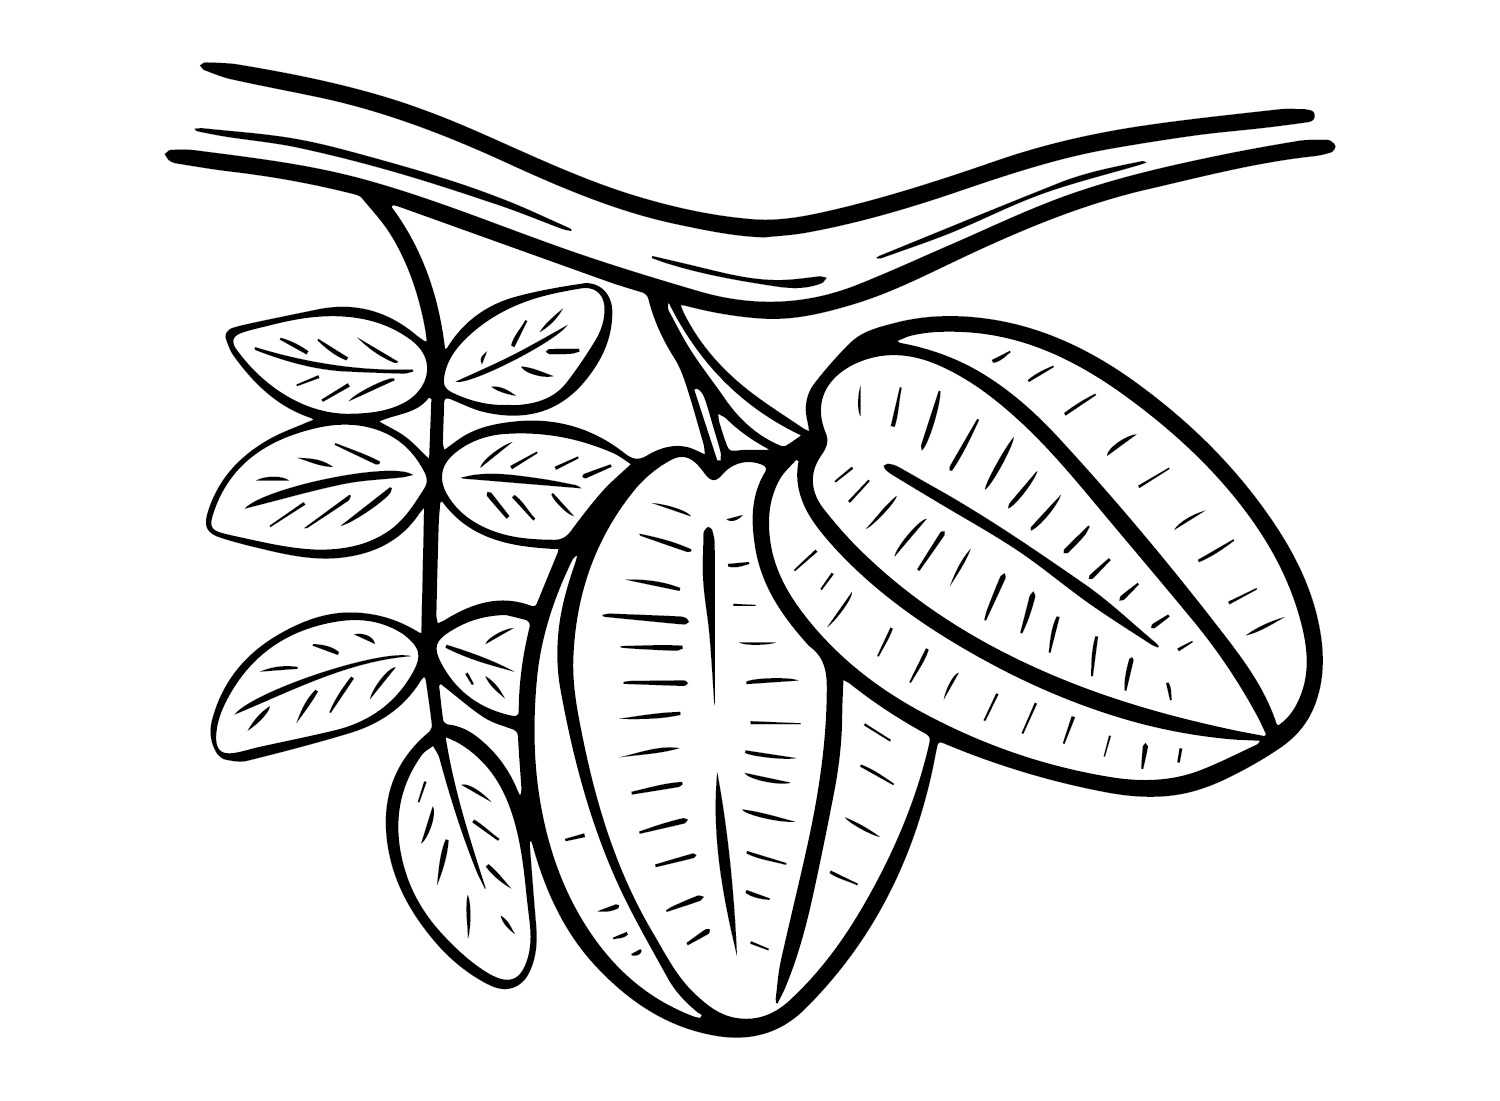 Starfruit Branch Coloring Page